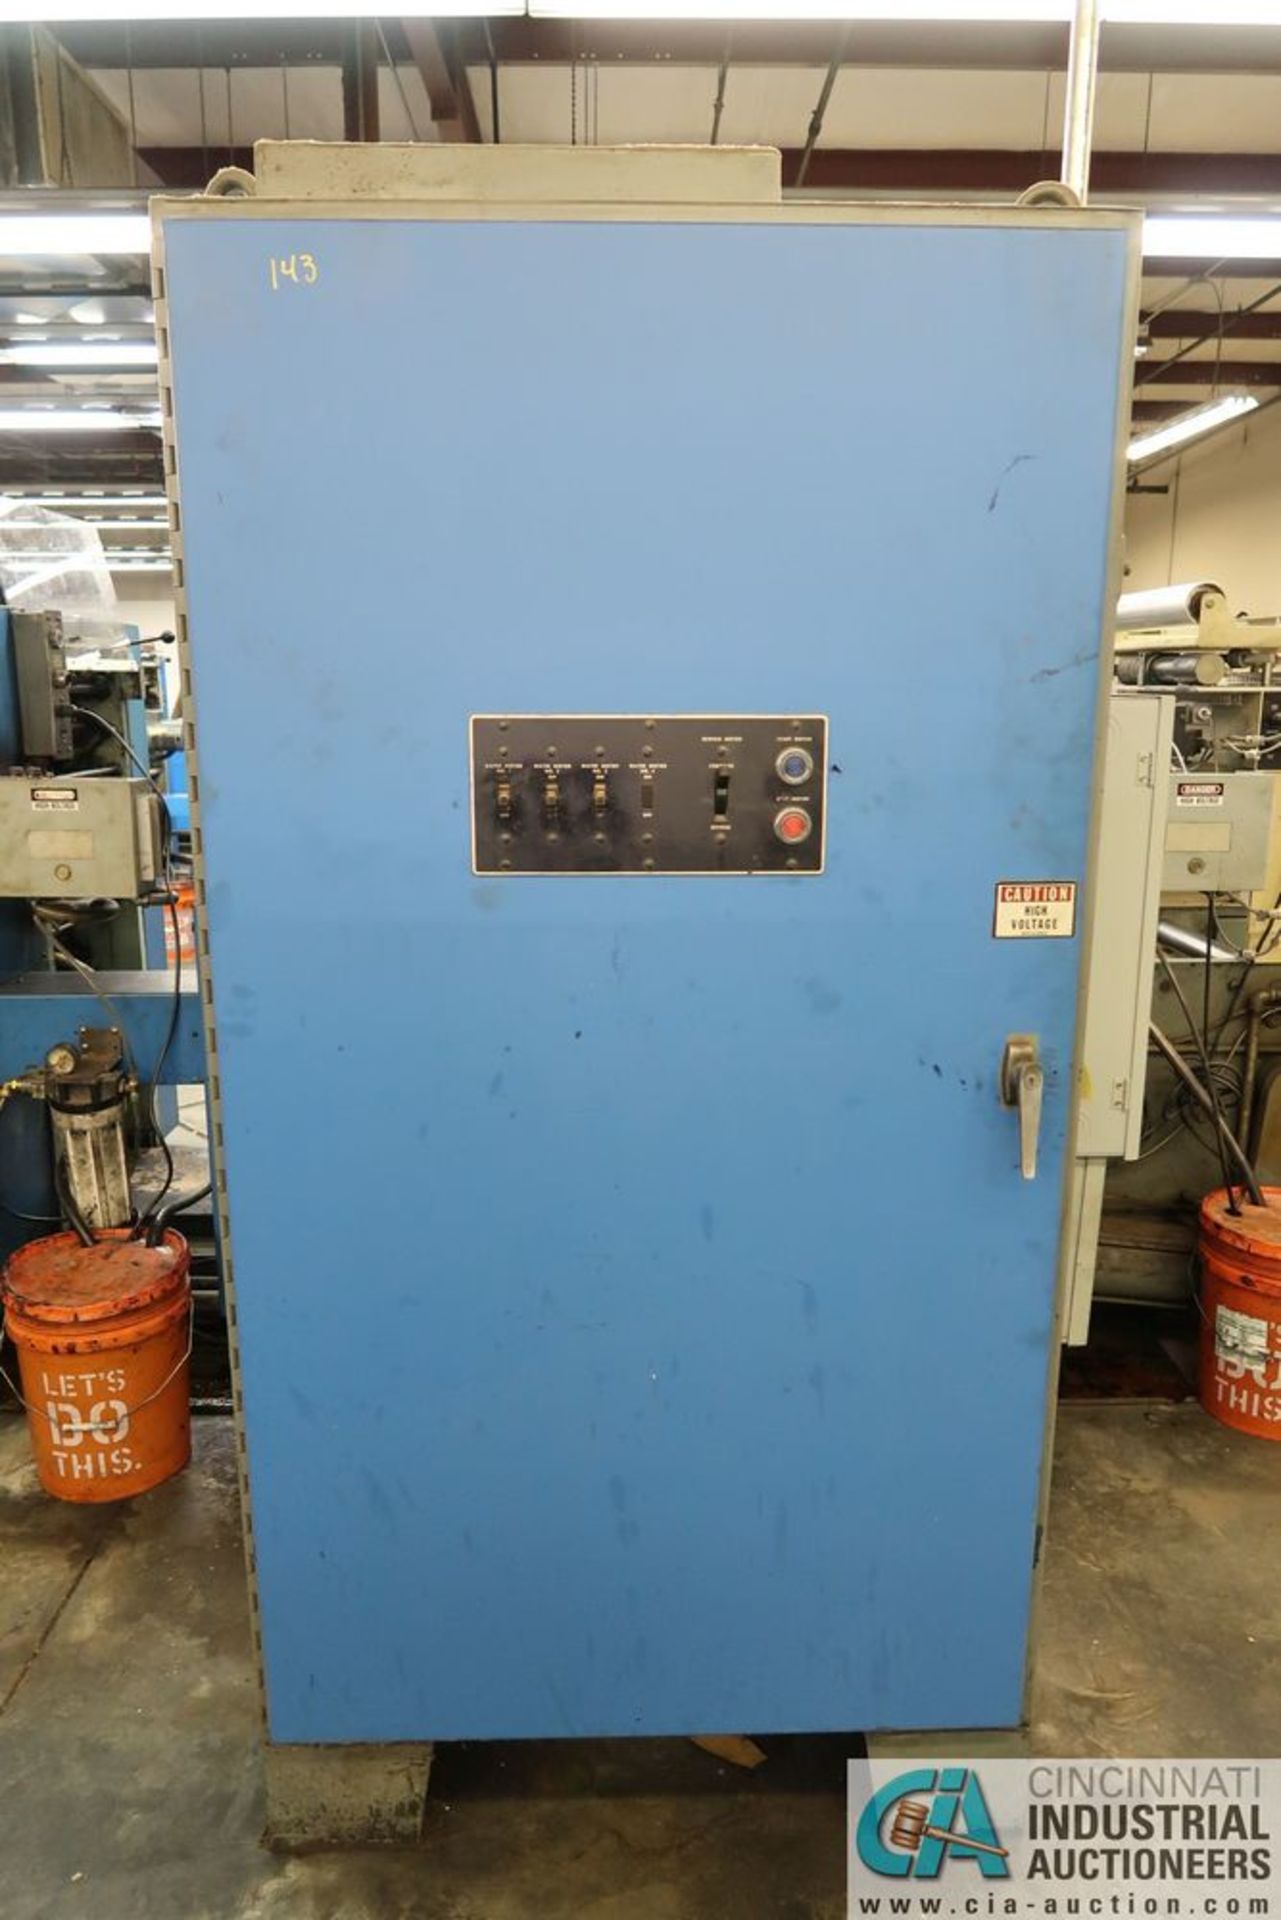 17" X 17-1/2" HARRIS 500 3-COLOR WEB PRESS; **Loading Fee Due the "ERRA" JAS Graphics, $3,600.00** - Image 17 of 20